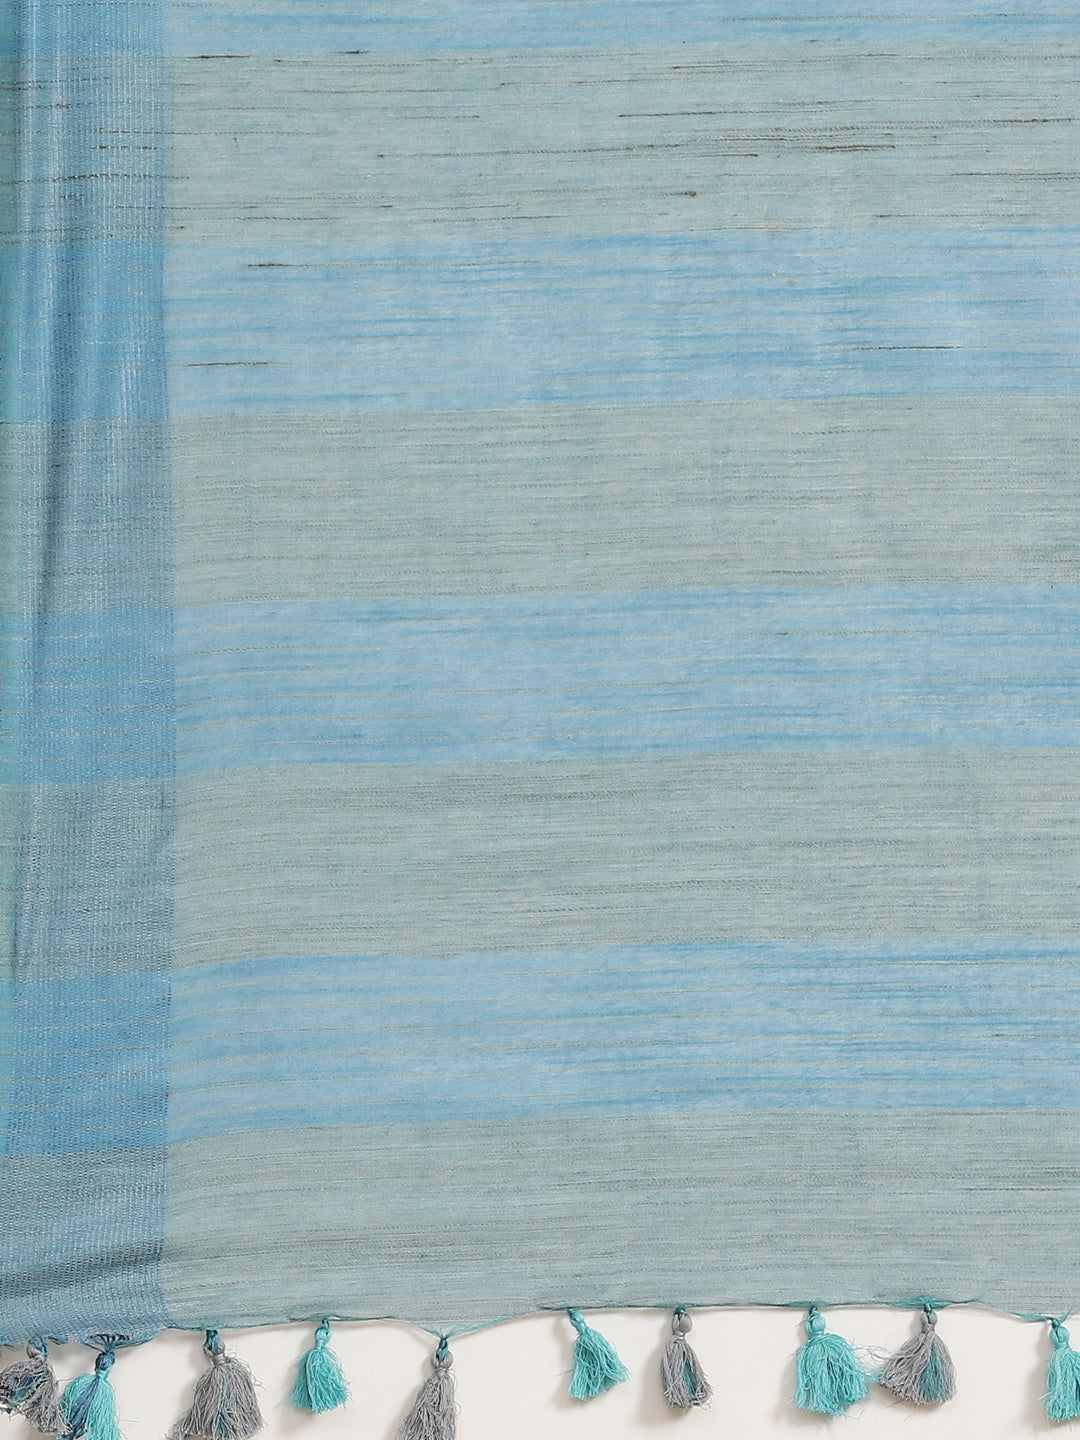 Blue and Teal, Kalakari India Linen Woven Saree and Blouse ALBGSA0080-Saree-Kalakari India-ALBGSA0080-Cotton, Geographical Indication, Hand Crafted, Heritage Prints, Linen, Natural Dyes, Red, Sarees, Shibori, Sustainable Fabrics, Woven, Yellow-[Linen,Ethnic,wear,Fashionista,Handloom,Handicraft,Indigo,blockprint,block,print,Cotton,Chanderi,Blue, latest,classy,party,bollywood,trendy,summer,style,traditional,formal,elegant,unique,style,hand,block,print, dabu,booti,gift,present,glamorous,affordable,